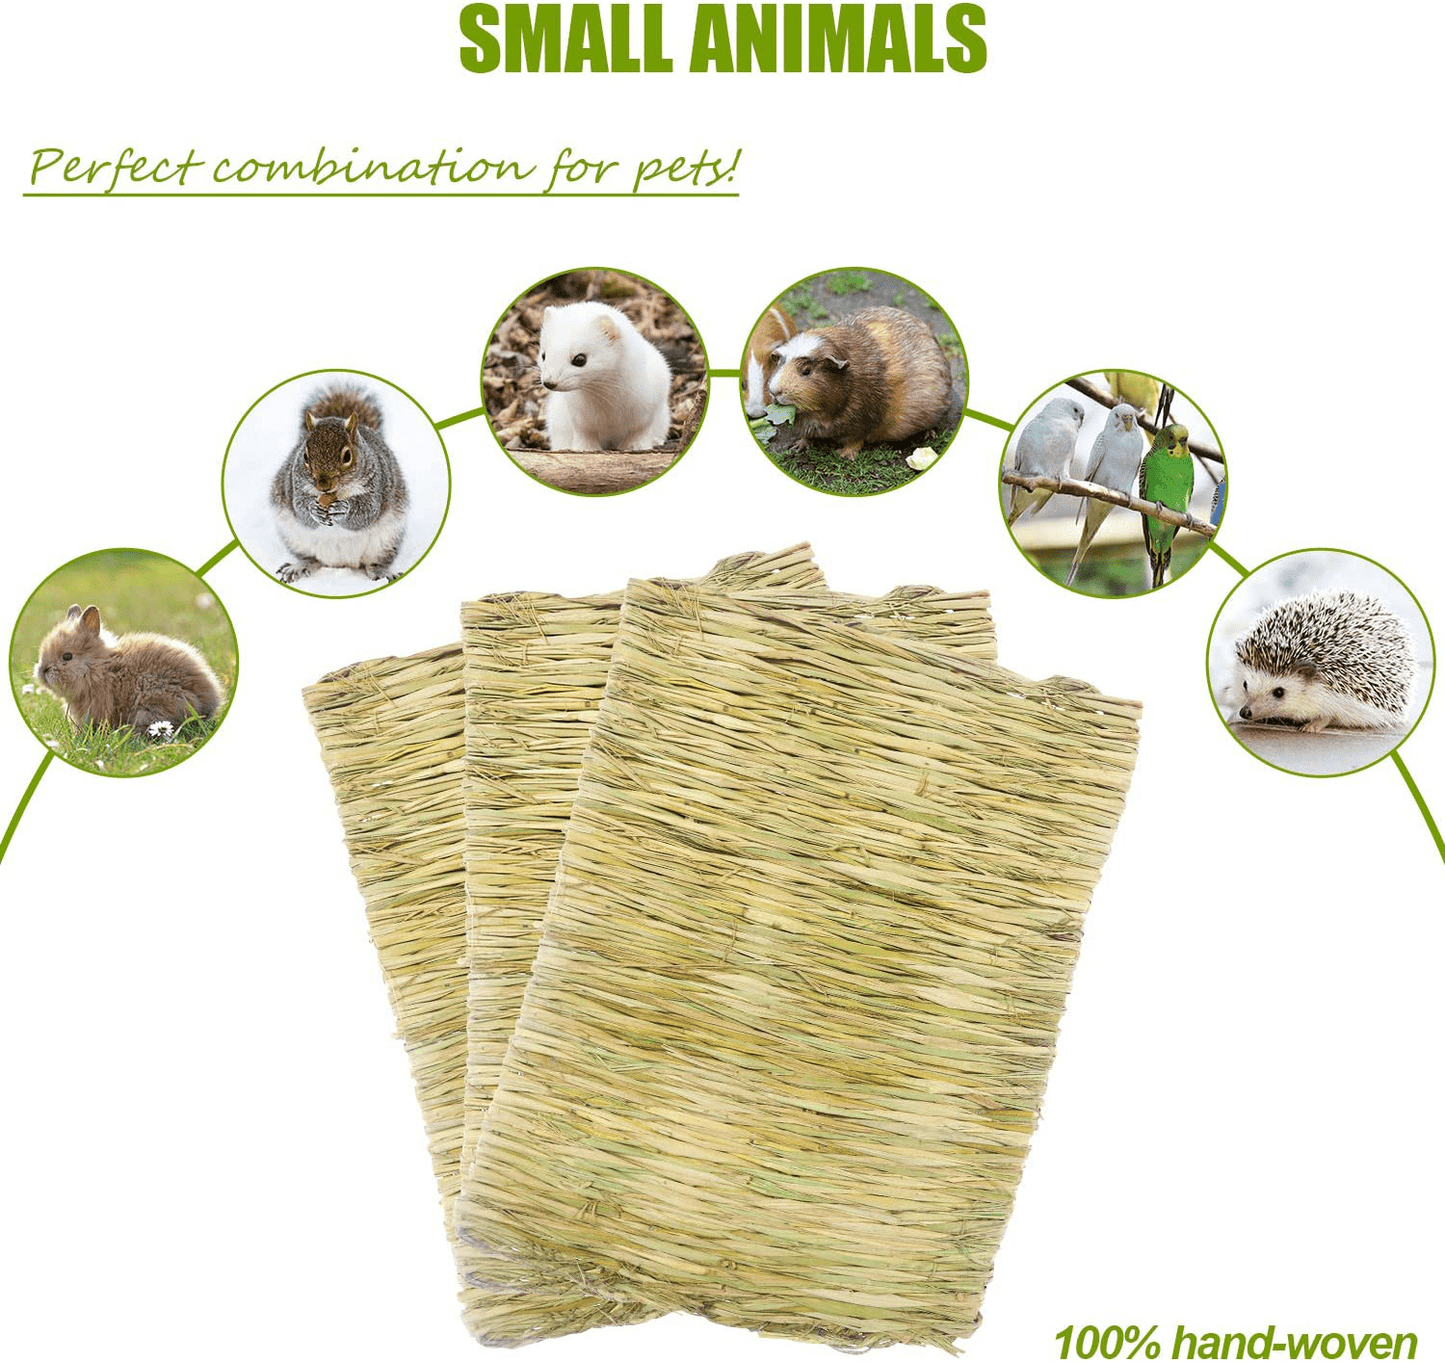 5 Pack Grass Mat Woven Bed Mat, Small Animal Natural Straw Bedding Nest Mat Chew Toys Bed Play Toy for Guinea Pig Parrot Rabbit Bunny Hamster Rat